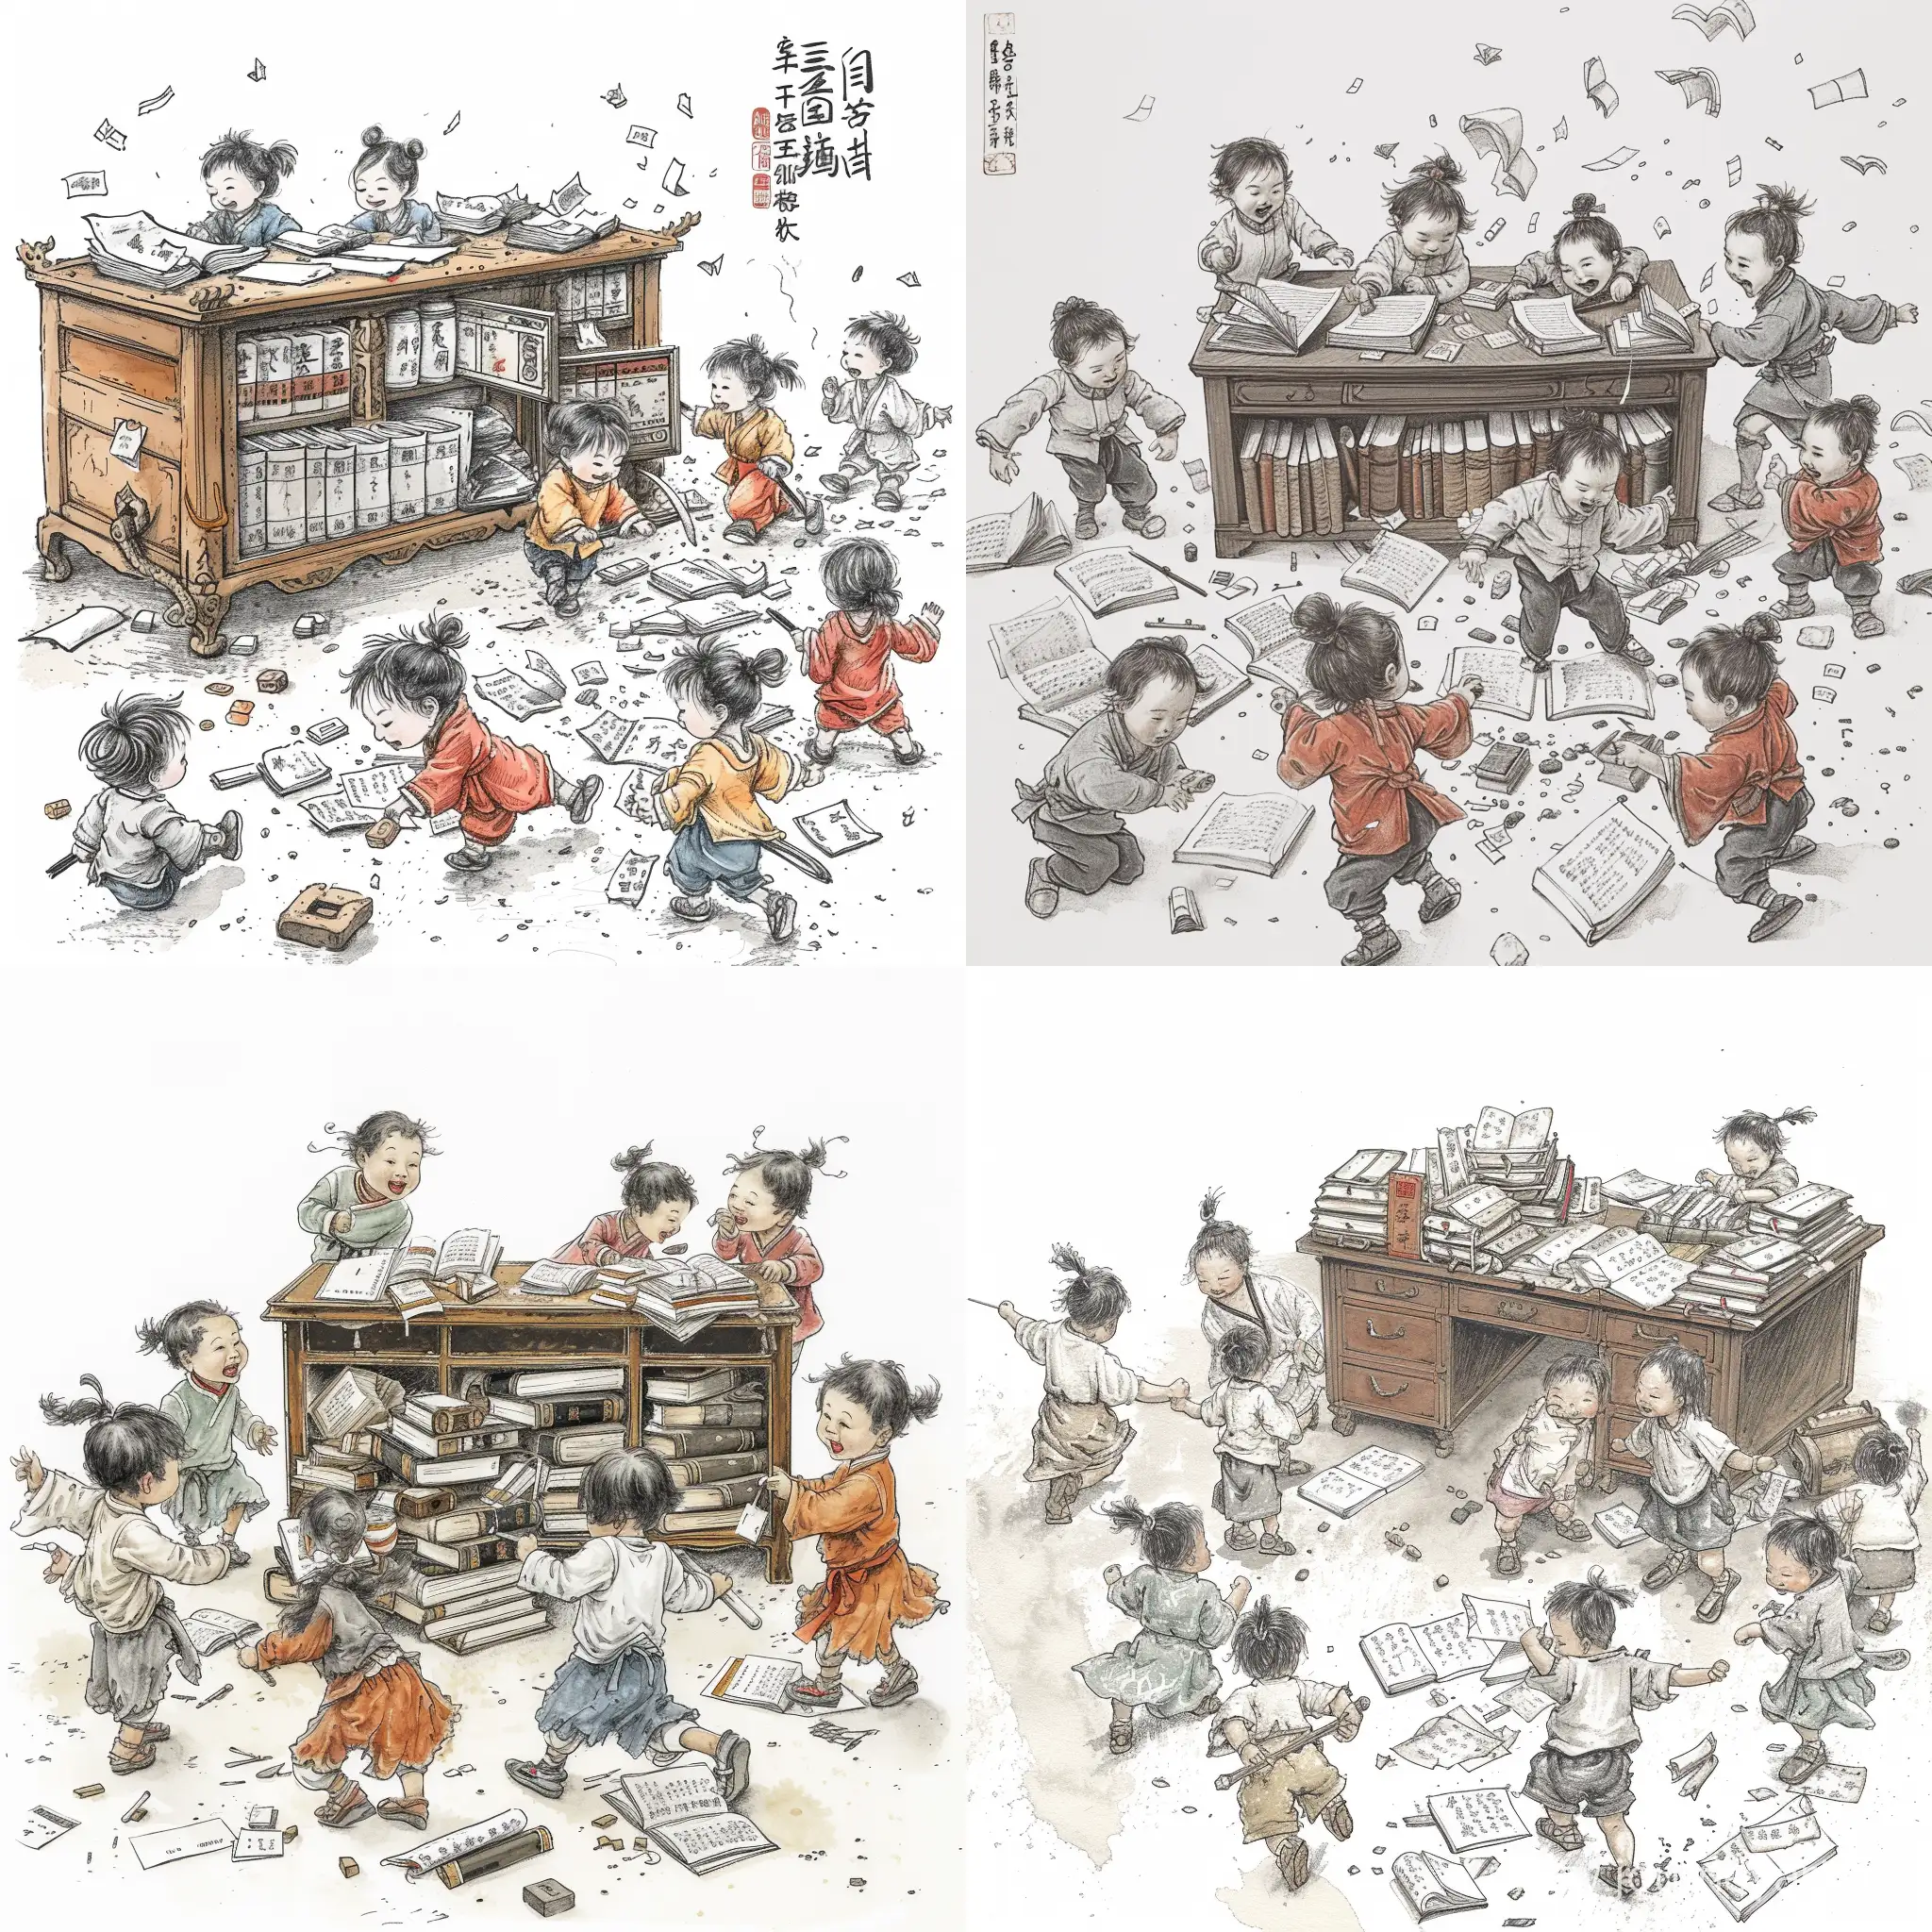 Ancient-Chinese-Children-Engaged-in-Scholarly-Play-with-Ink-and-Texts